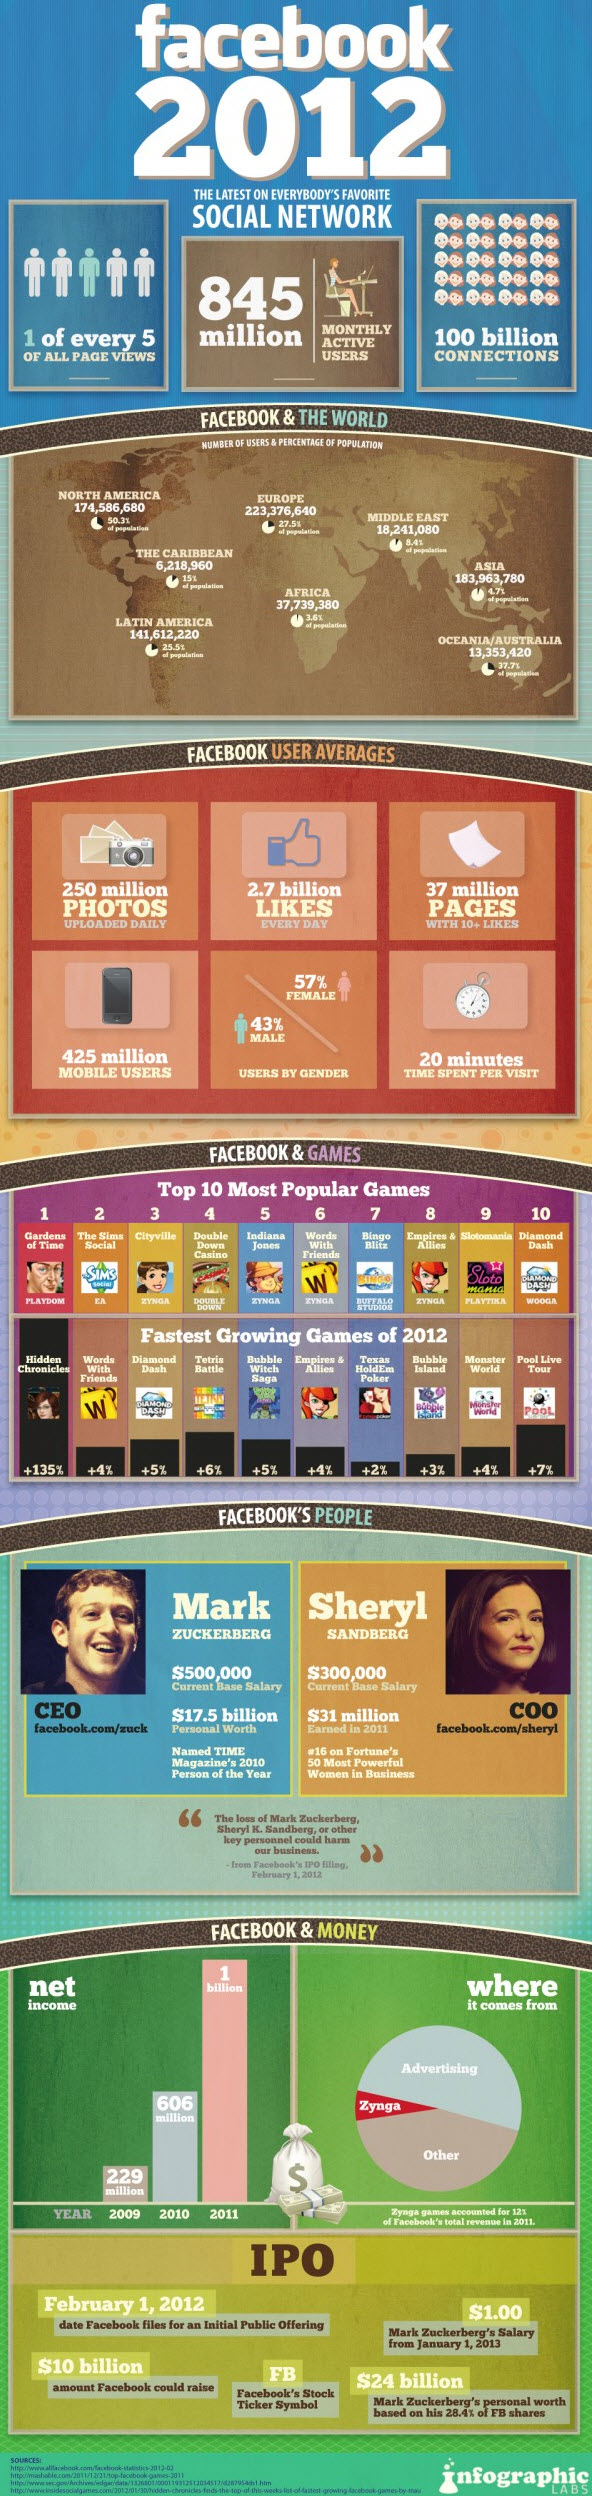 Facebook facts figures and statistics 2012